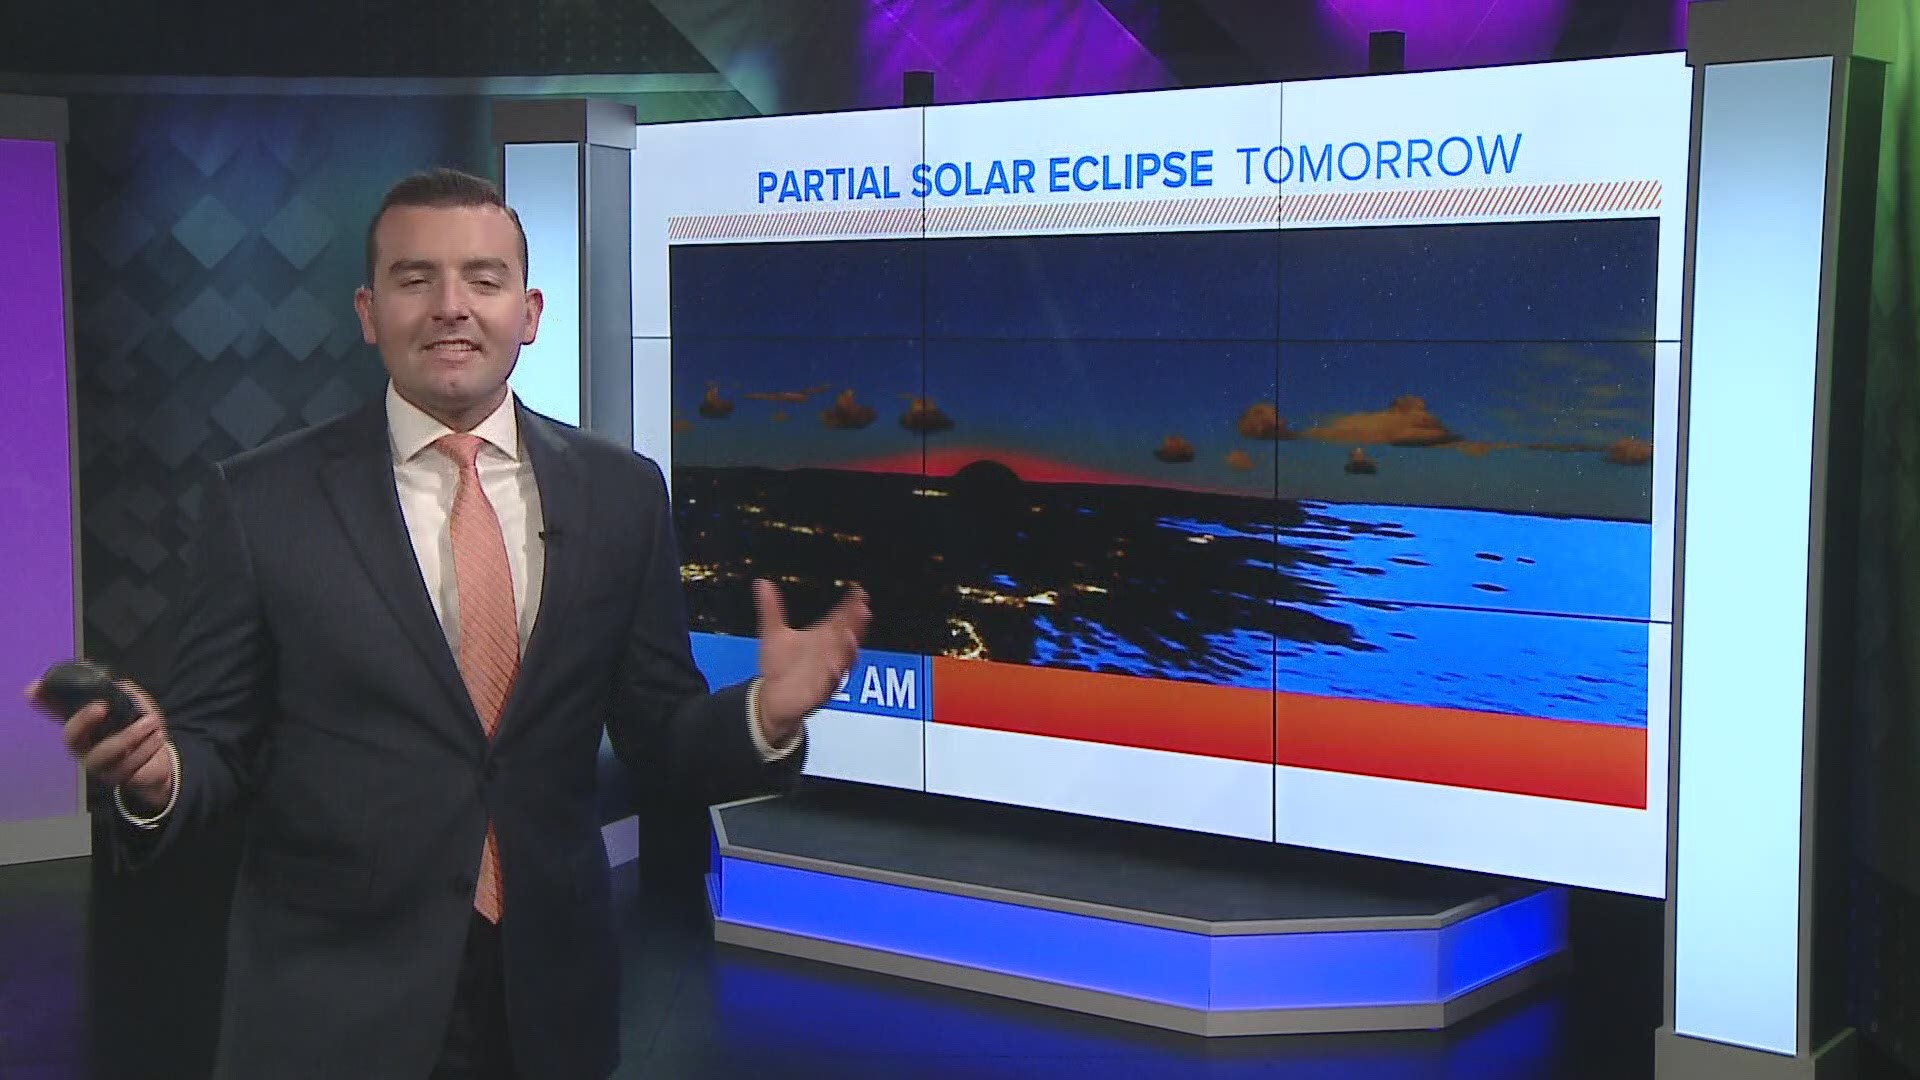 Meteorologist Ryan Breton says the sky will be clear to partly cloudy during Thursday morning's eclipse.